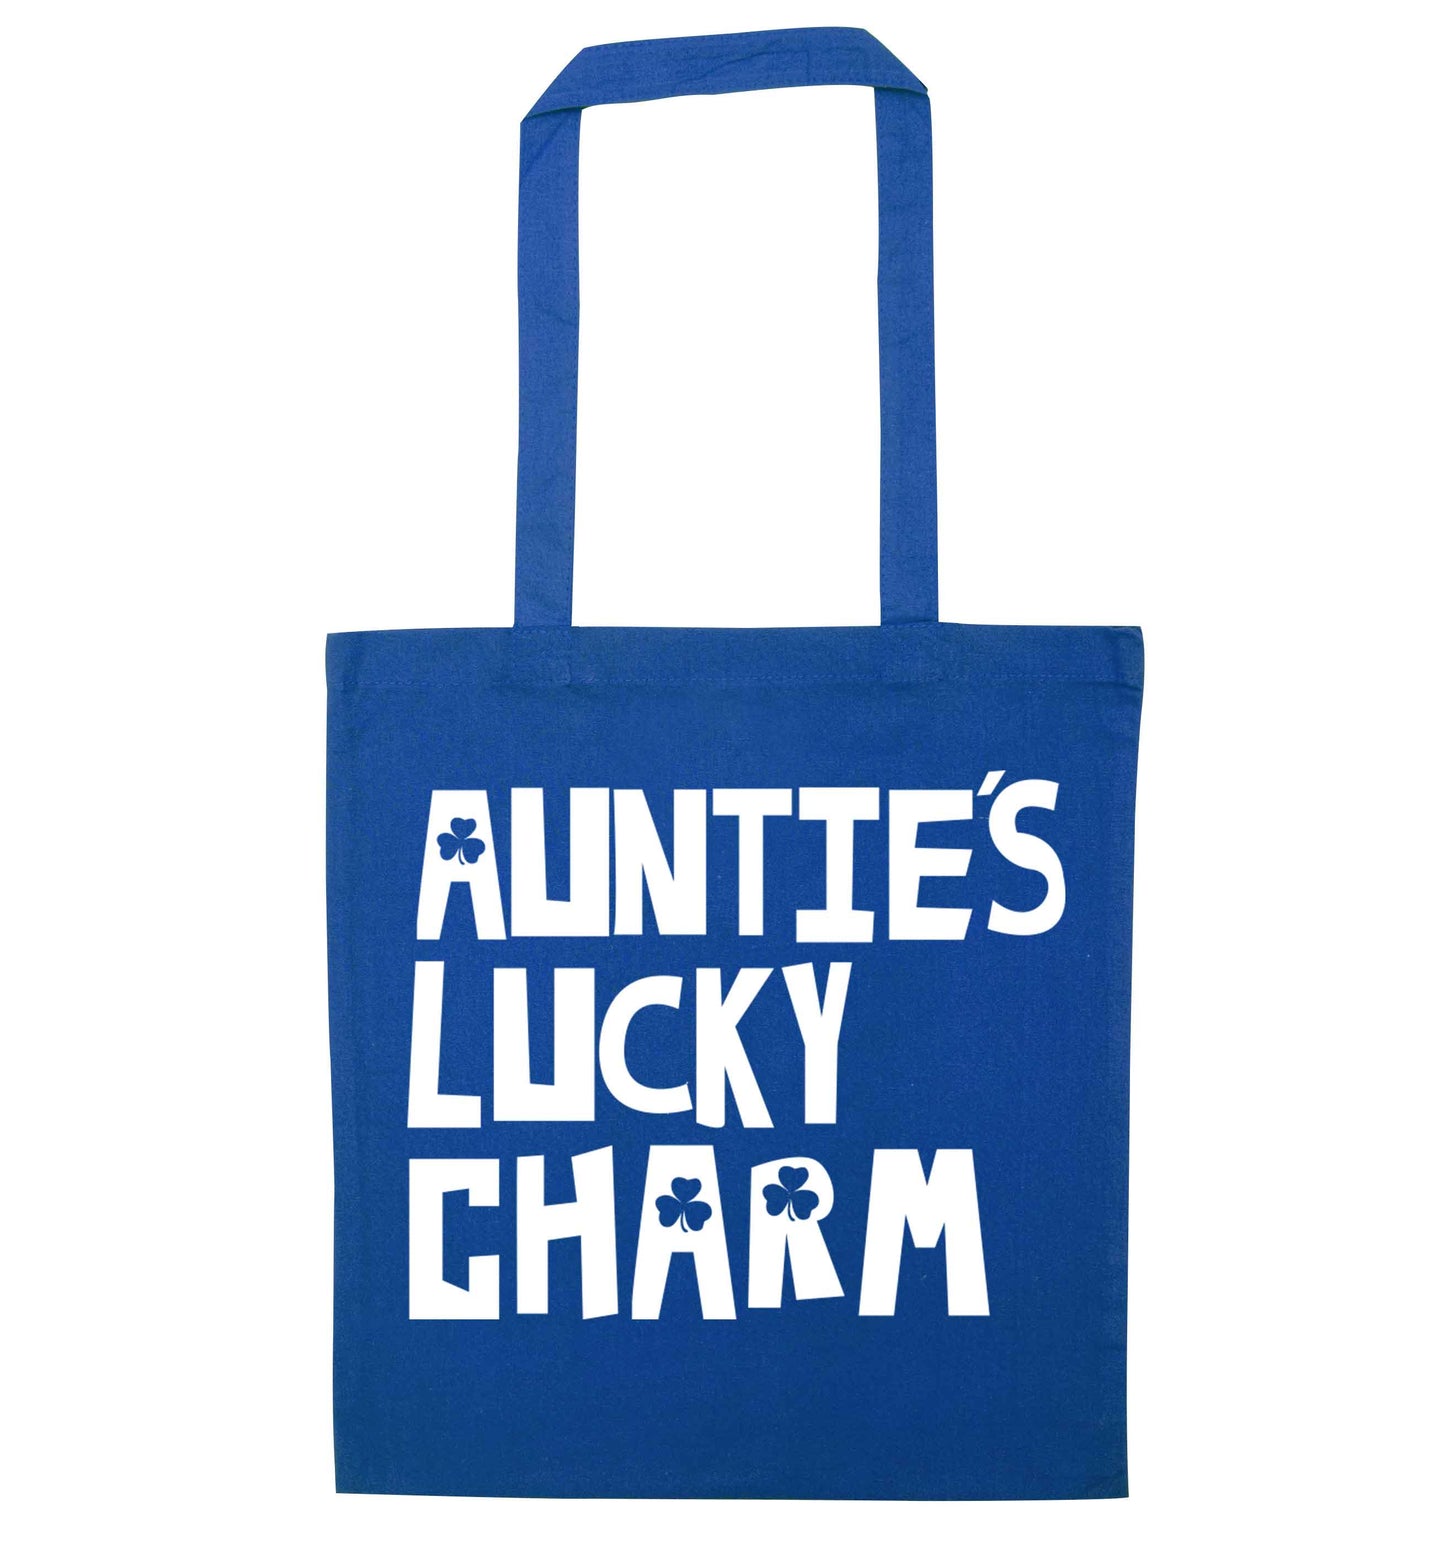 Auntie's lucky charm blue tote bag